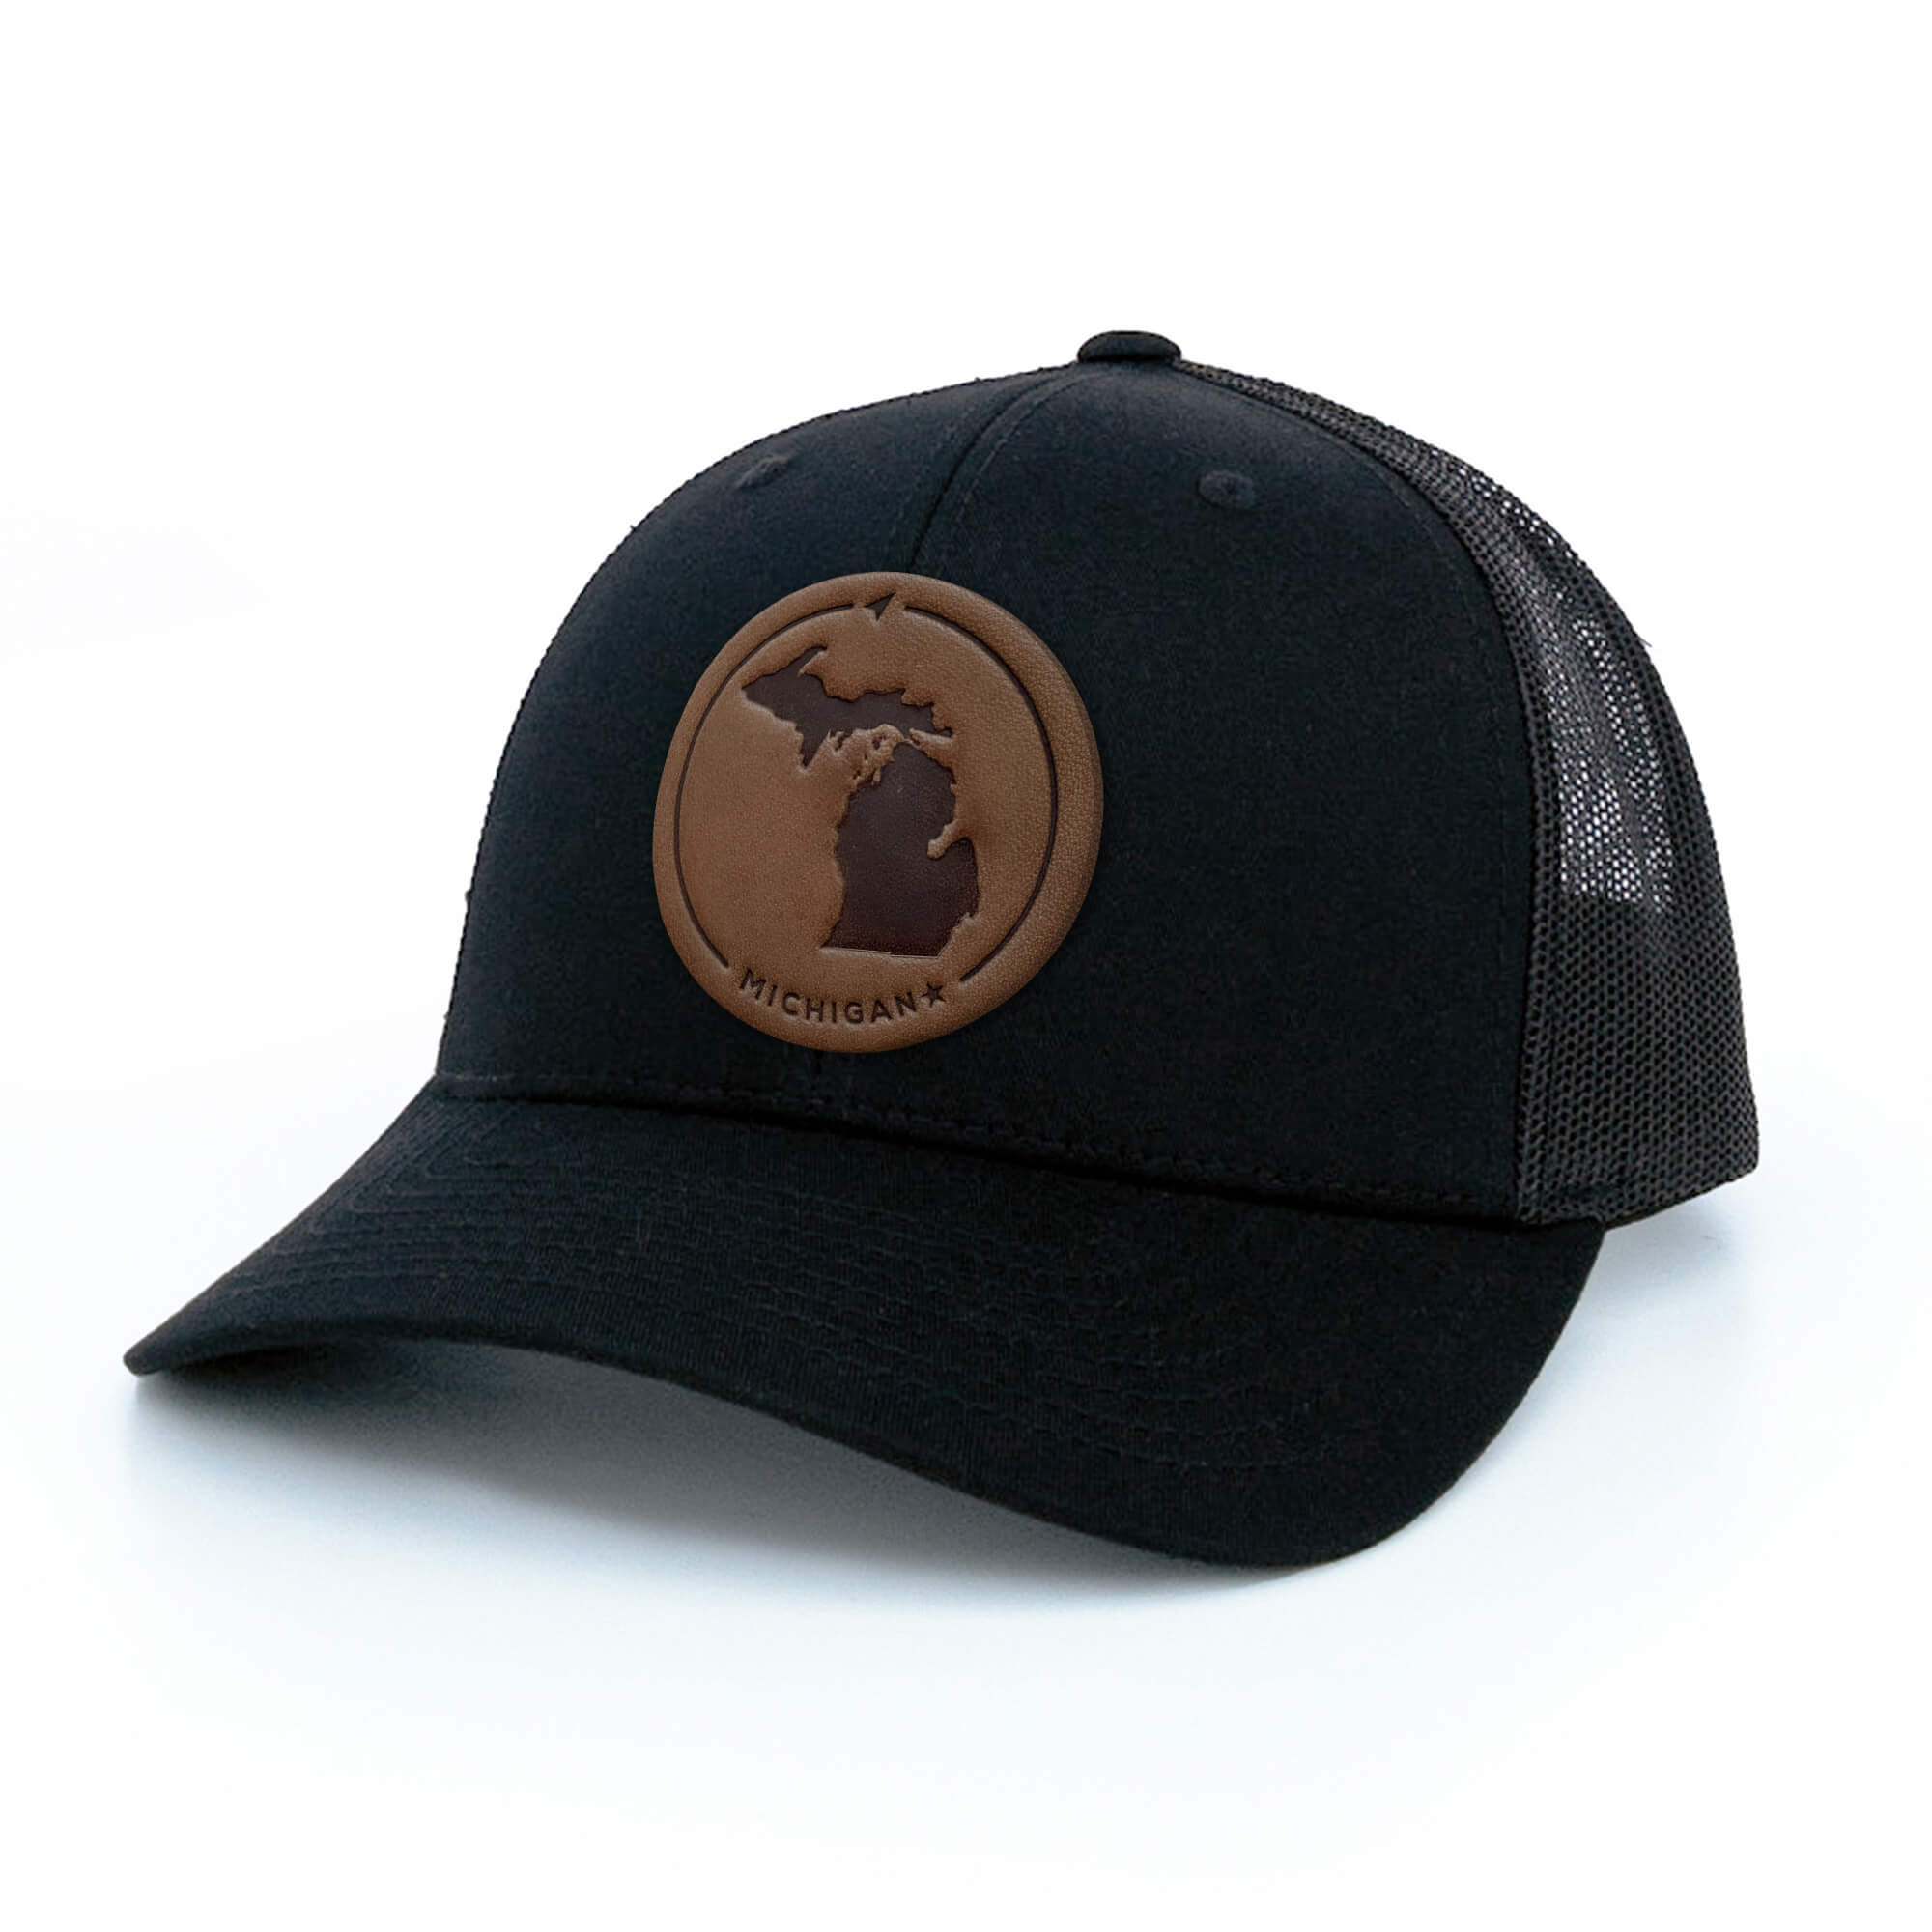 Black trucker hat with full-grain leather patch of a Michigan | BLACK-003-007, CHARC-003-007, NAVY-003-007, HGREY-003-007, MOSS-003-007, BROWN-003-007